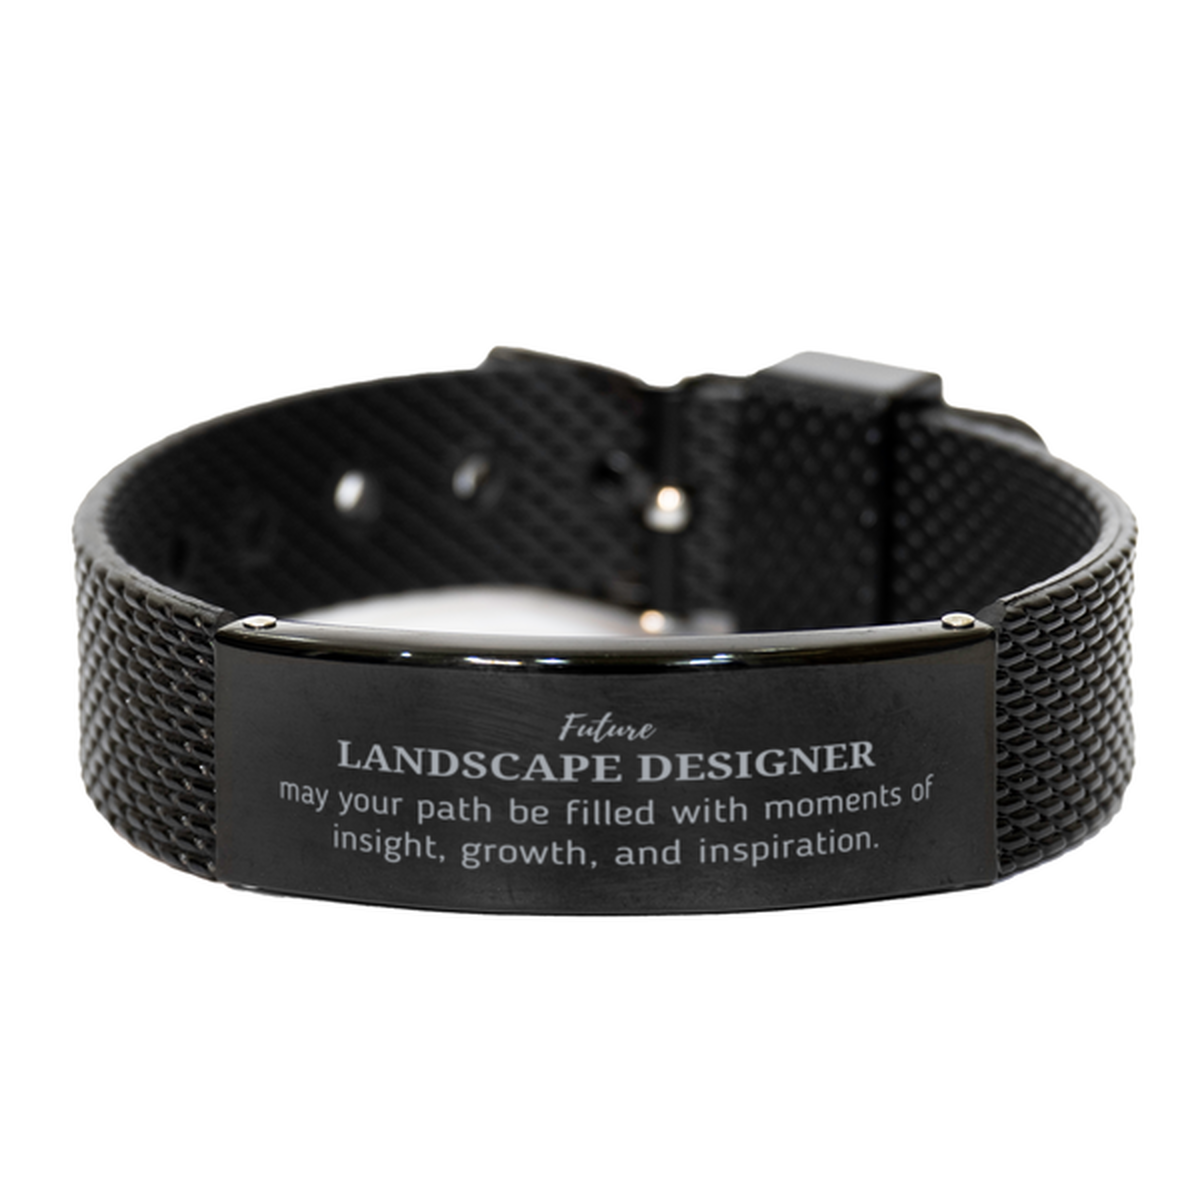 Future Landscape Designer Gifts, May your path be filled with moments of insight, Graduation Gifts for New Landscape Designer, Christmas Unique Black Shark Mesh Bracelet For Men, Women, Friends